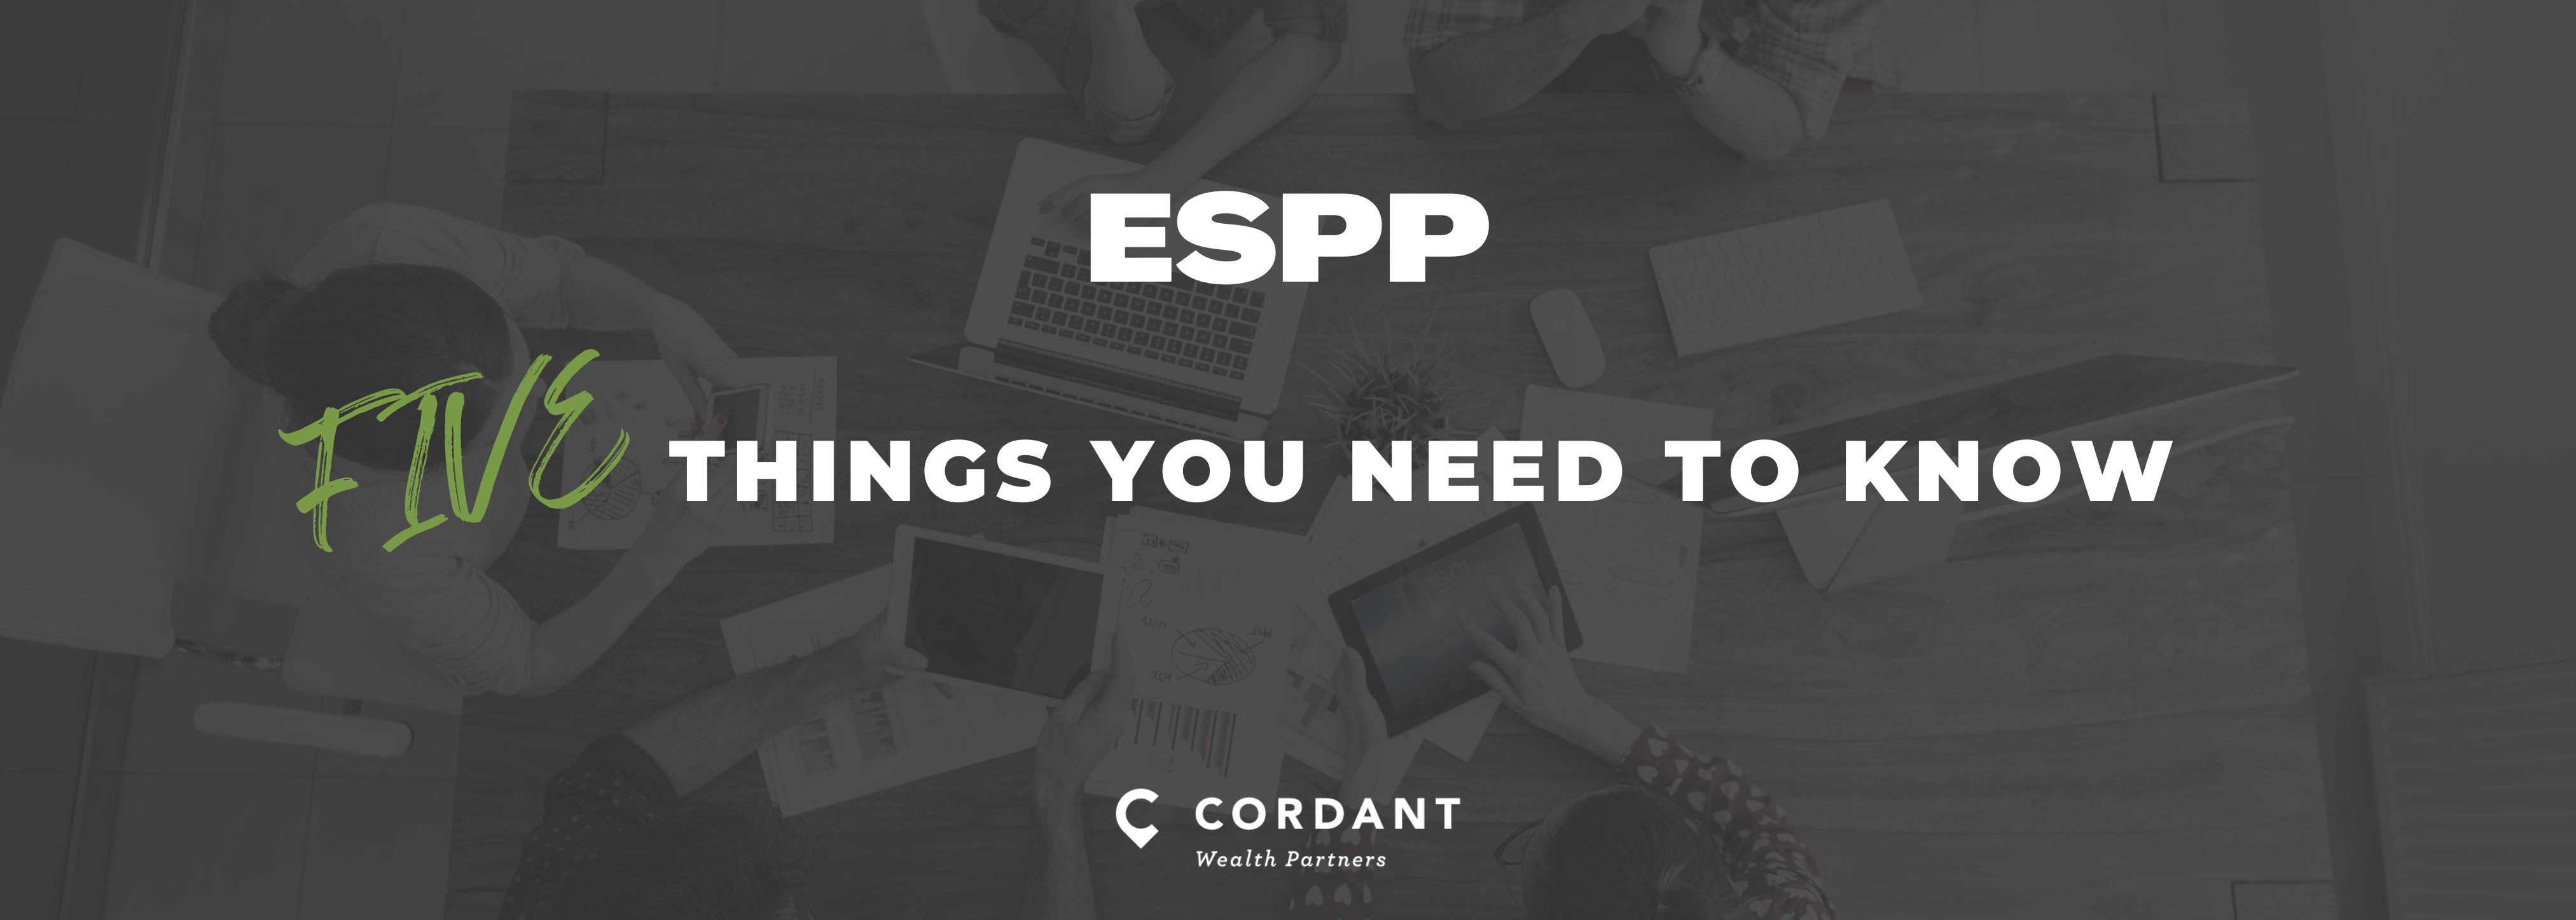 Employee Stock Purchase Plan (ESPP): The 5 Things You Need to Know